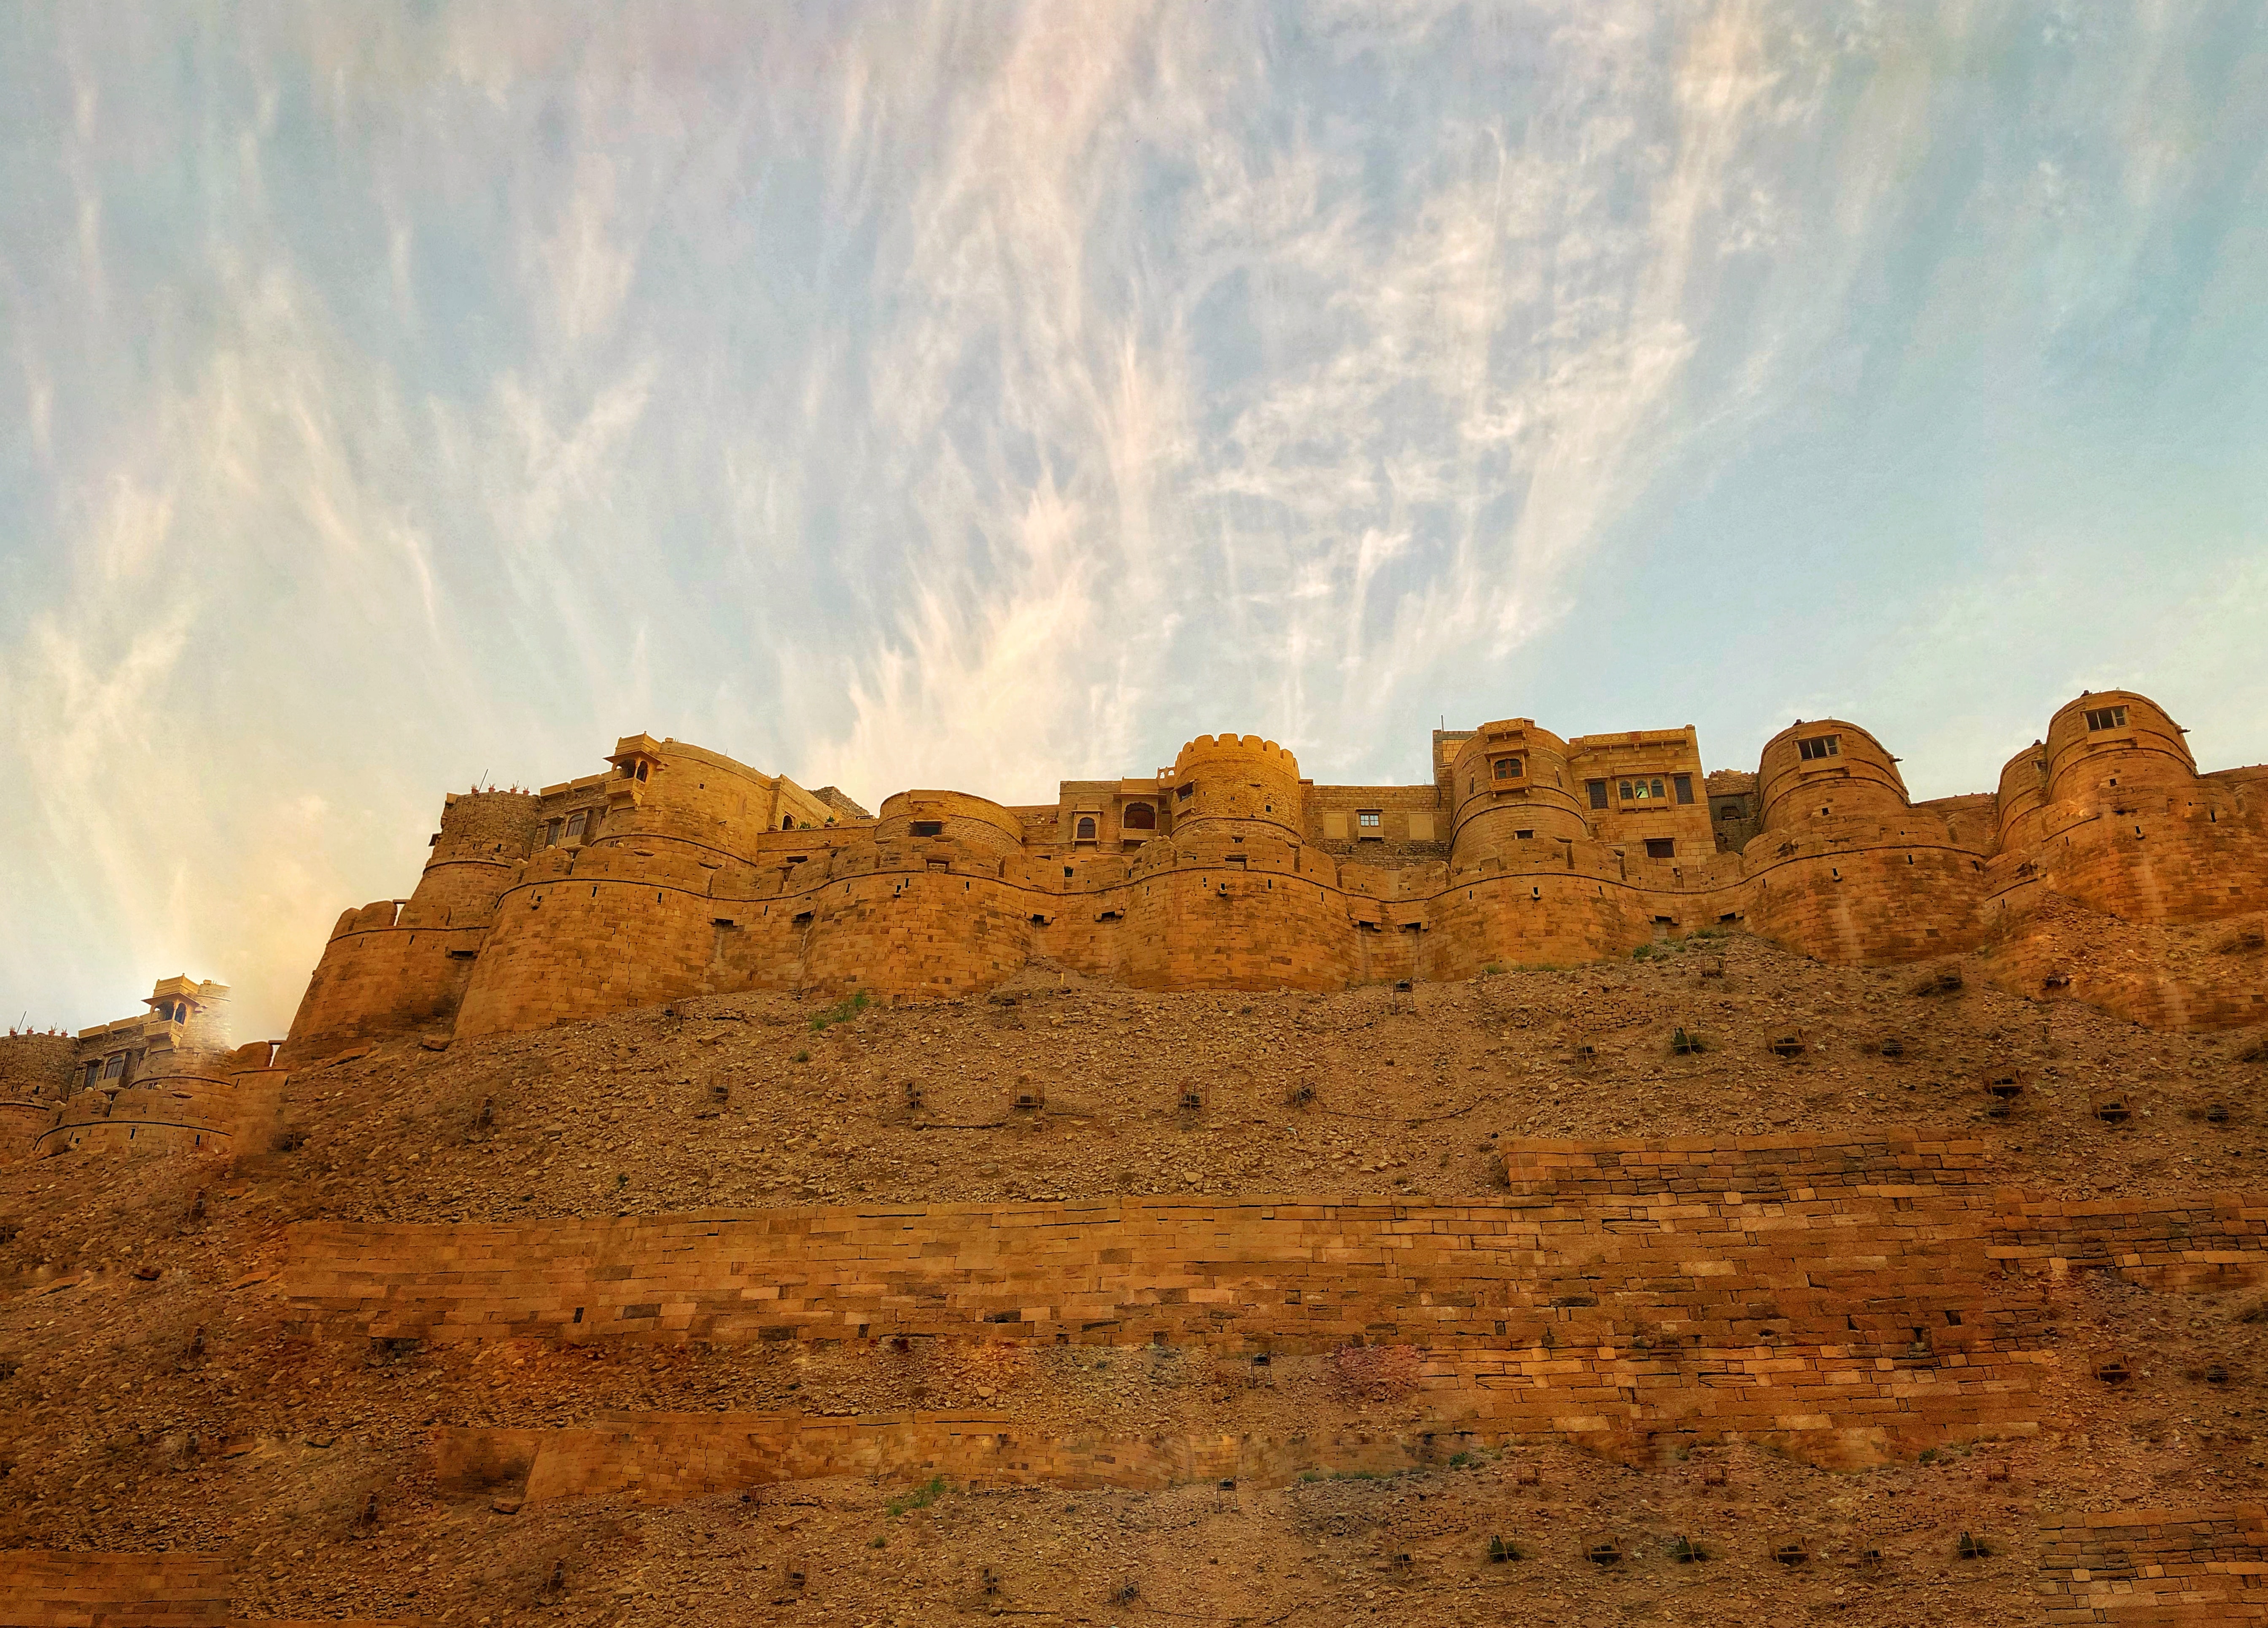 Jaisalmer fort, forts in India, Rajasthan